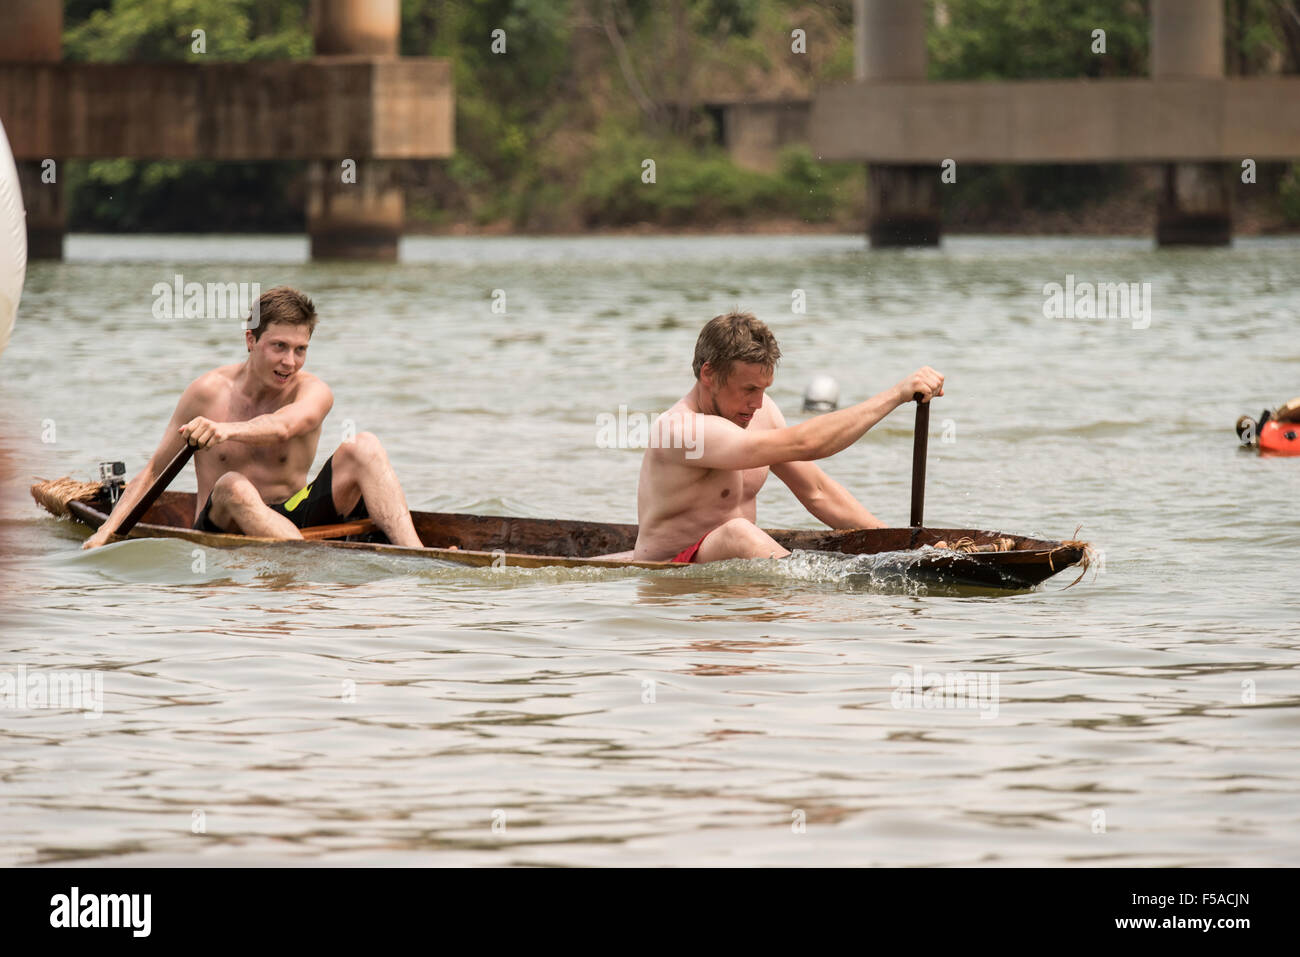 Palmas, Brazil. 30th October, 2015. The Finnish team's canoe takes in water during the canoeing event at the  International Indigenous Games, in the city of Palmas, Tocantins State, Brazil. Credit:  Sue Cunningham Photographic/Alamy Live News Stock Photo